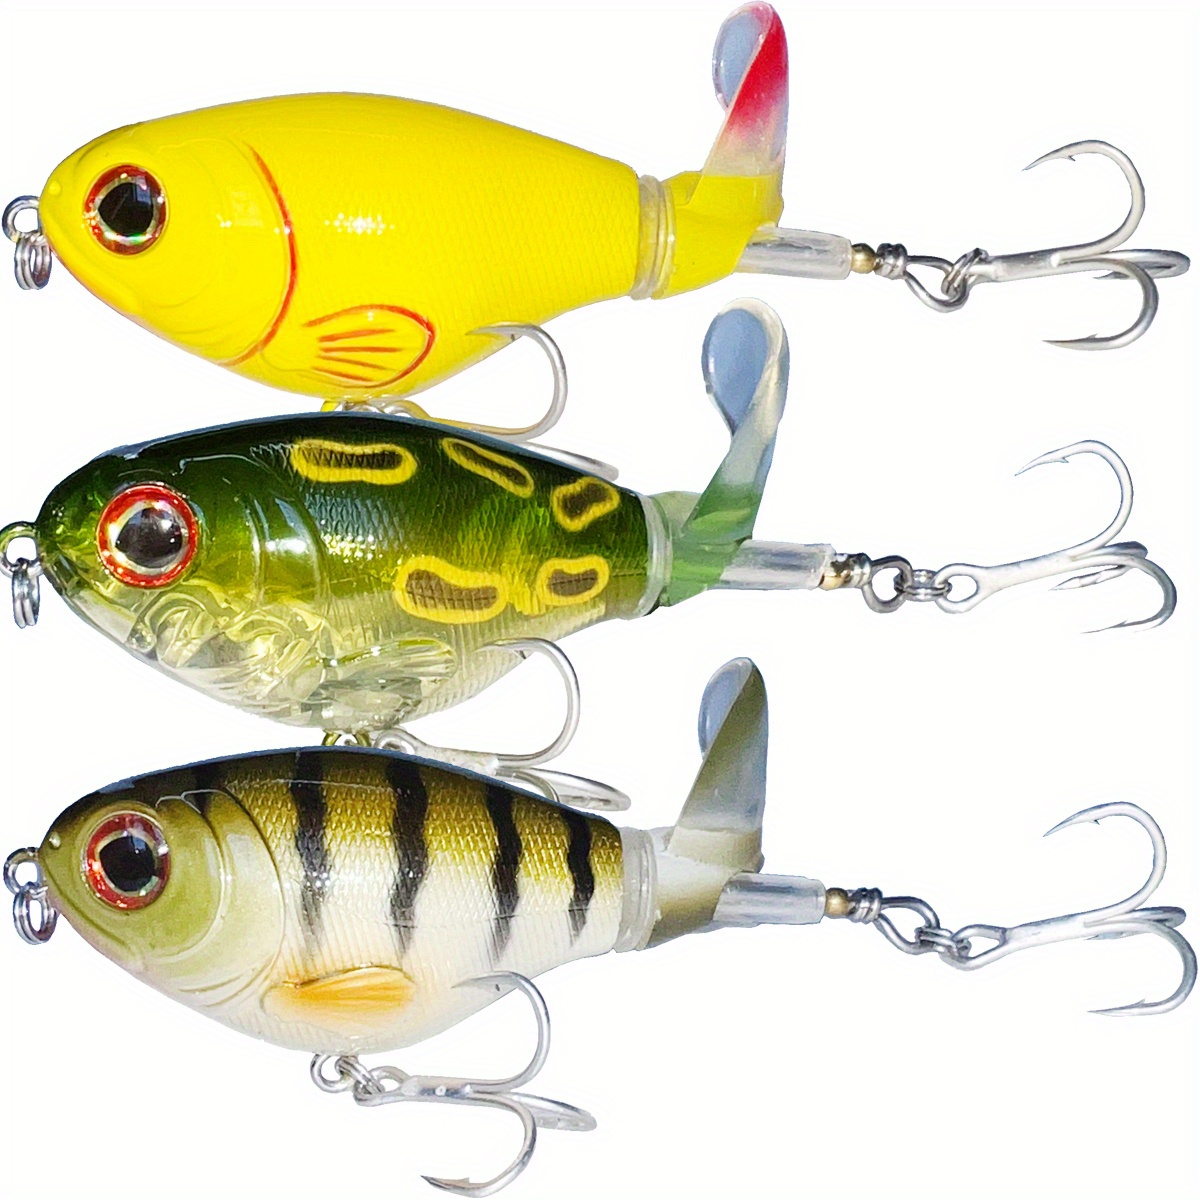 TRUSCEND Topwater Fishing Lures with BKK Hooks, Pencil Plopper Fishing  Lures for Bass Catfish Pike Perch, Top Water Bass Bait Lure with Propeller  Tail, Pencil Floating Lure Freshwater or Saltwater, Floating Lures 